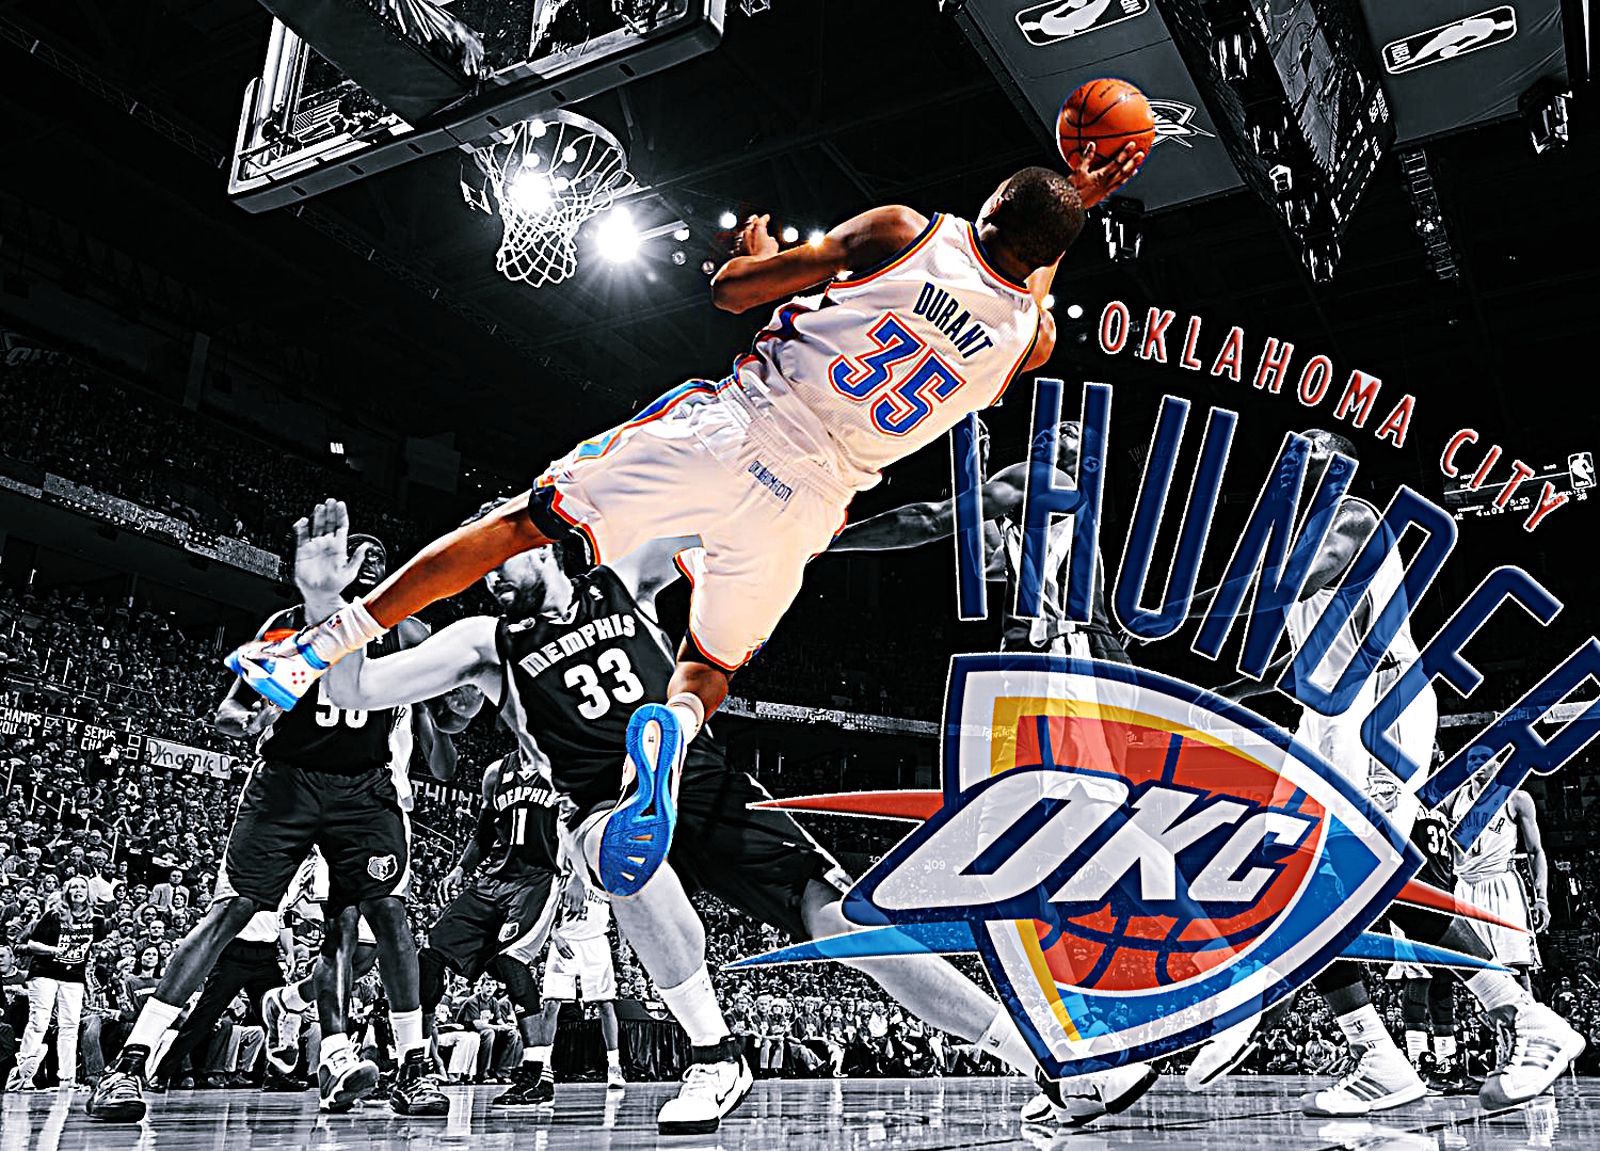 Basketball Forever  Oklahoma City Thunder Wallpaper Can KD  OKC storm  their way to the NBA Finals  Facebook